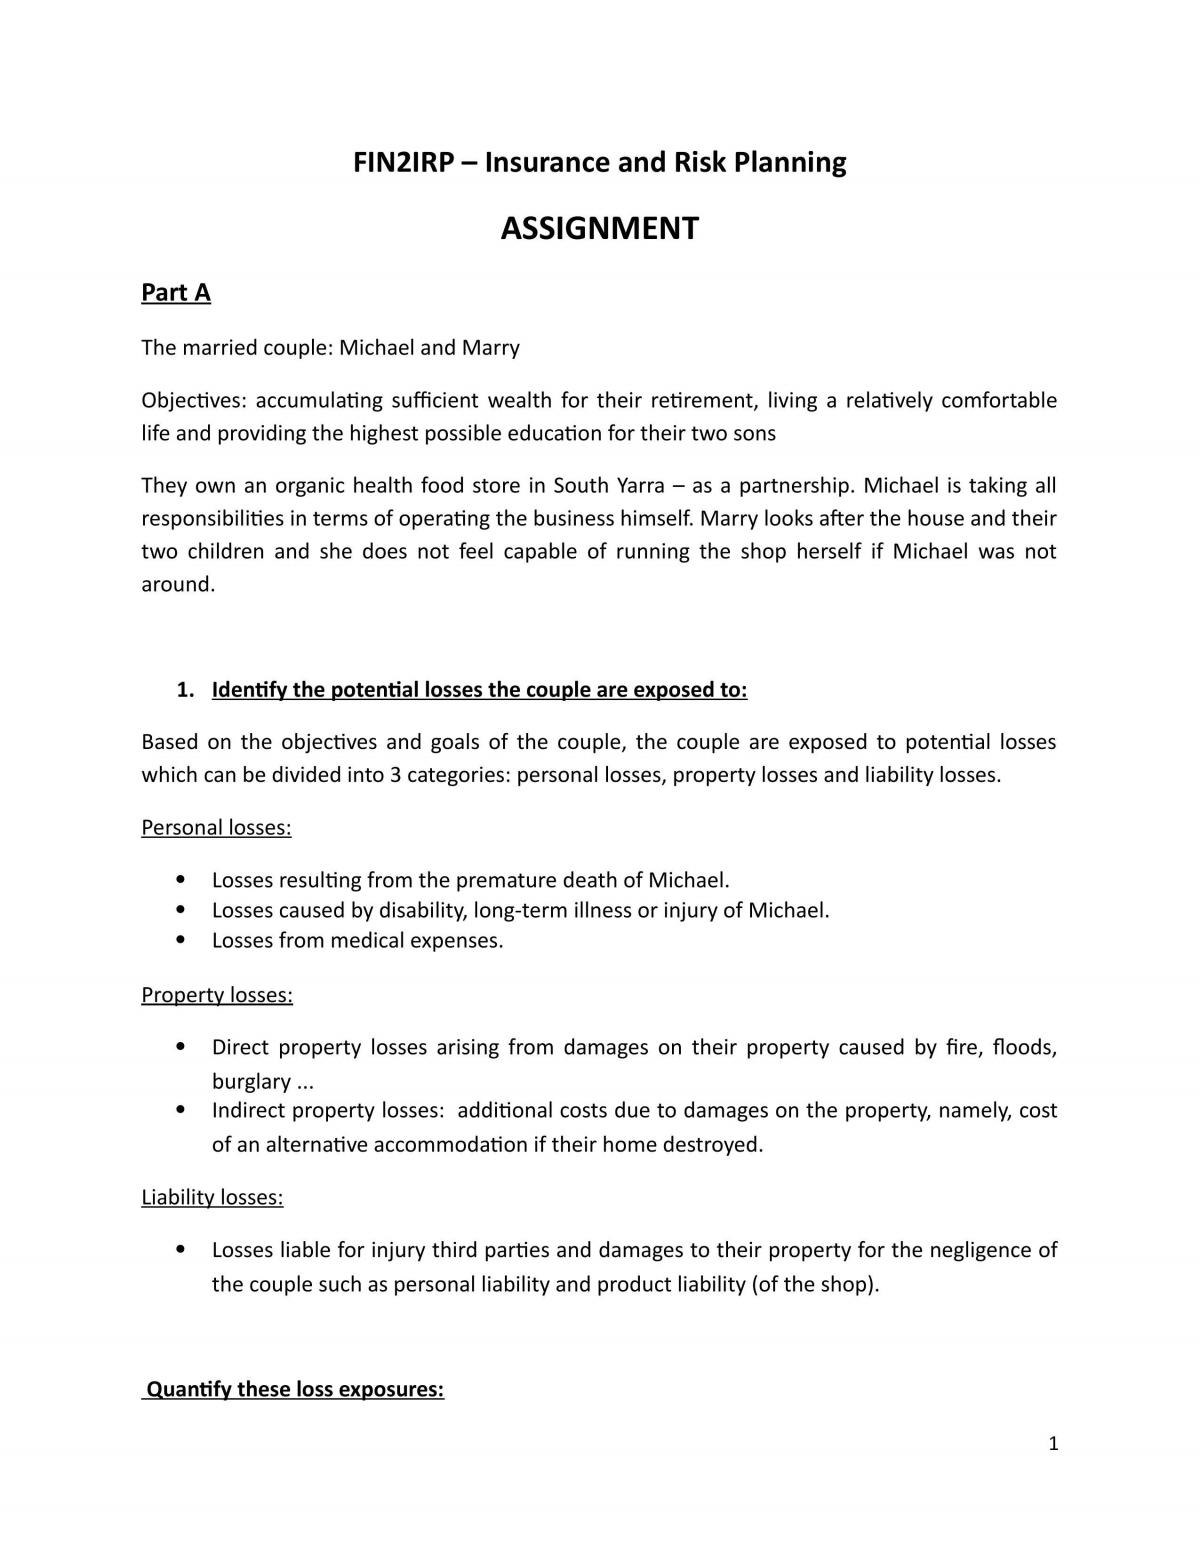 Assignment of Risk Management - Page 1